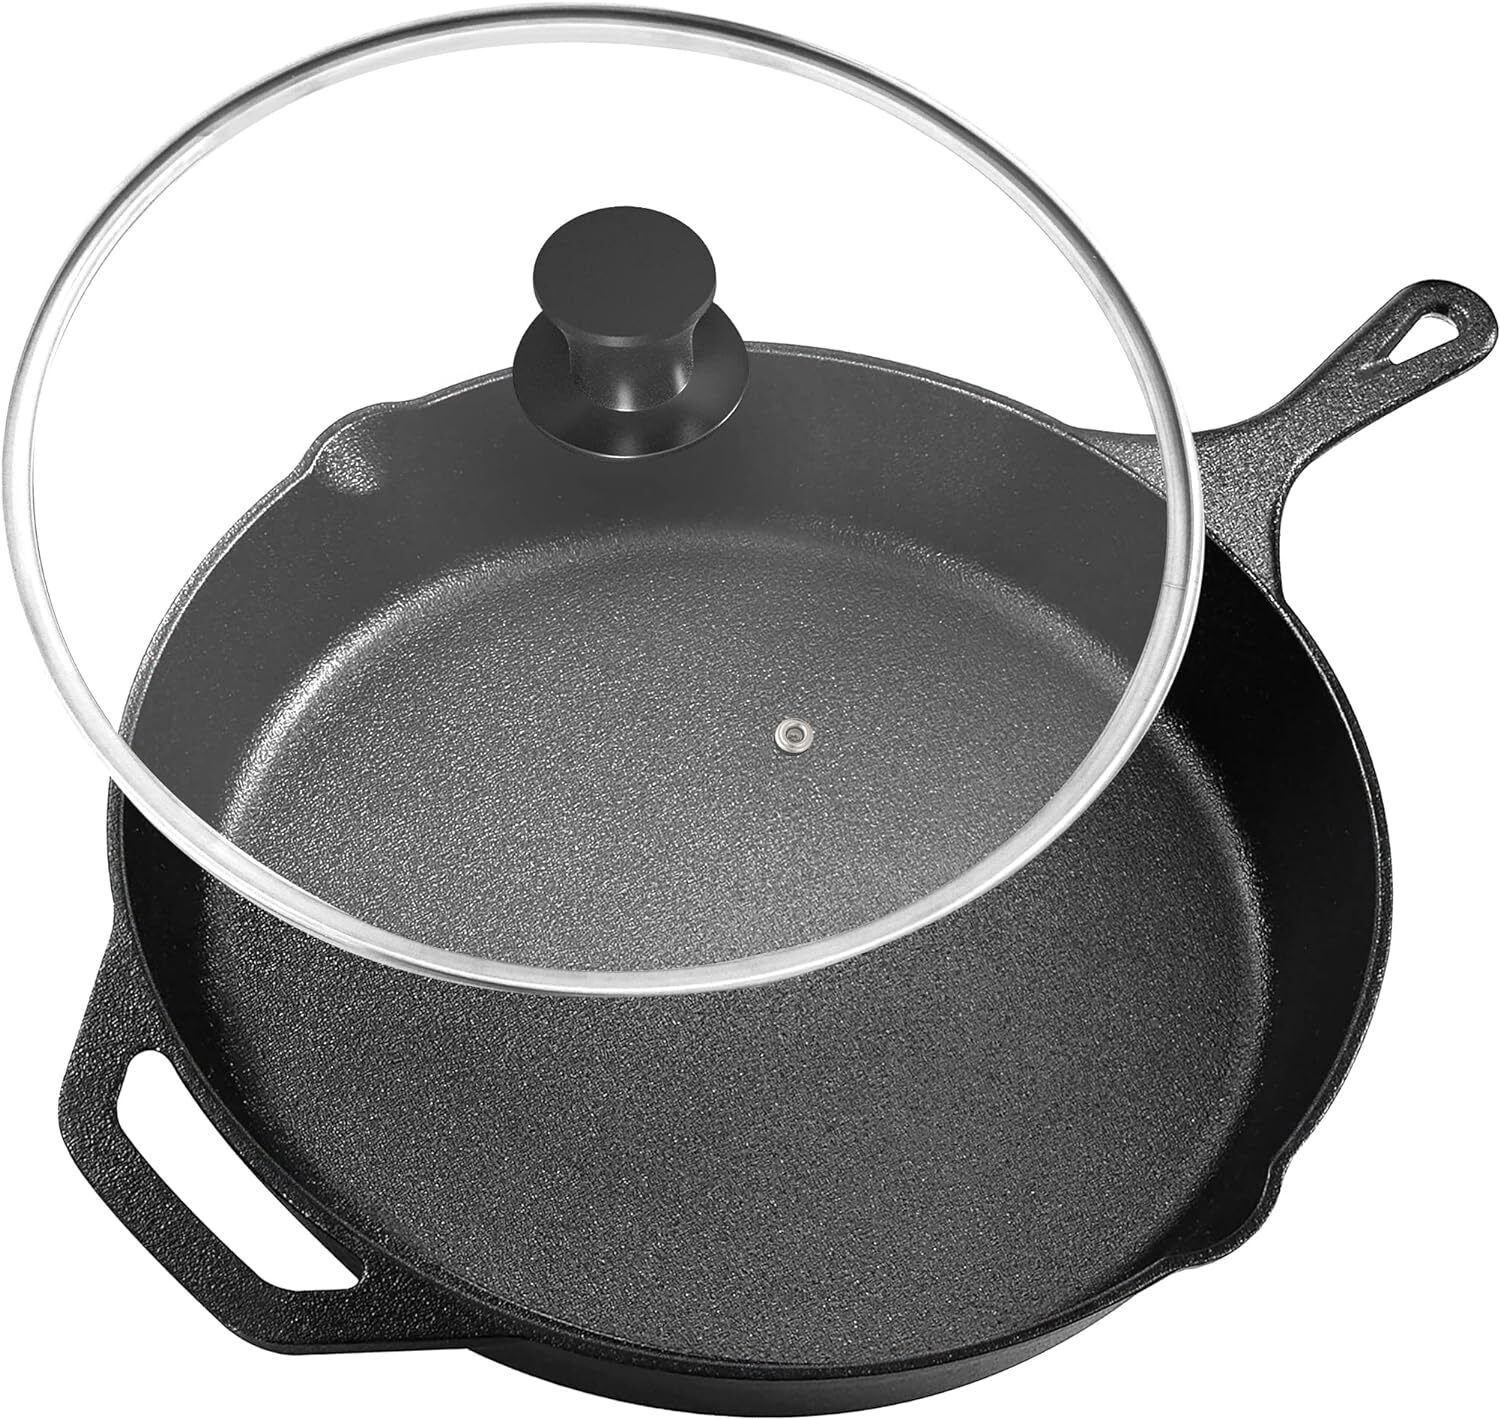 Pre-Seasoned Cast Iron Skillet With Lid Frying Pan Cast Iron Pans Utopia Kitchen